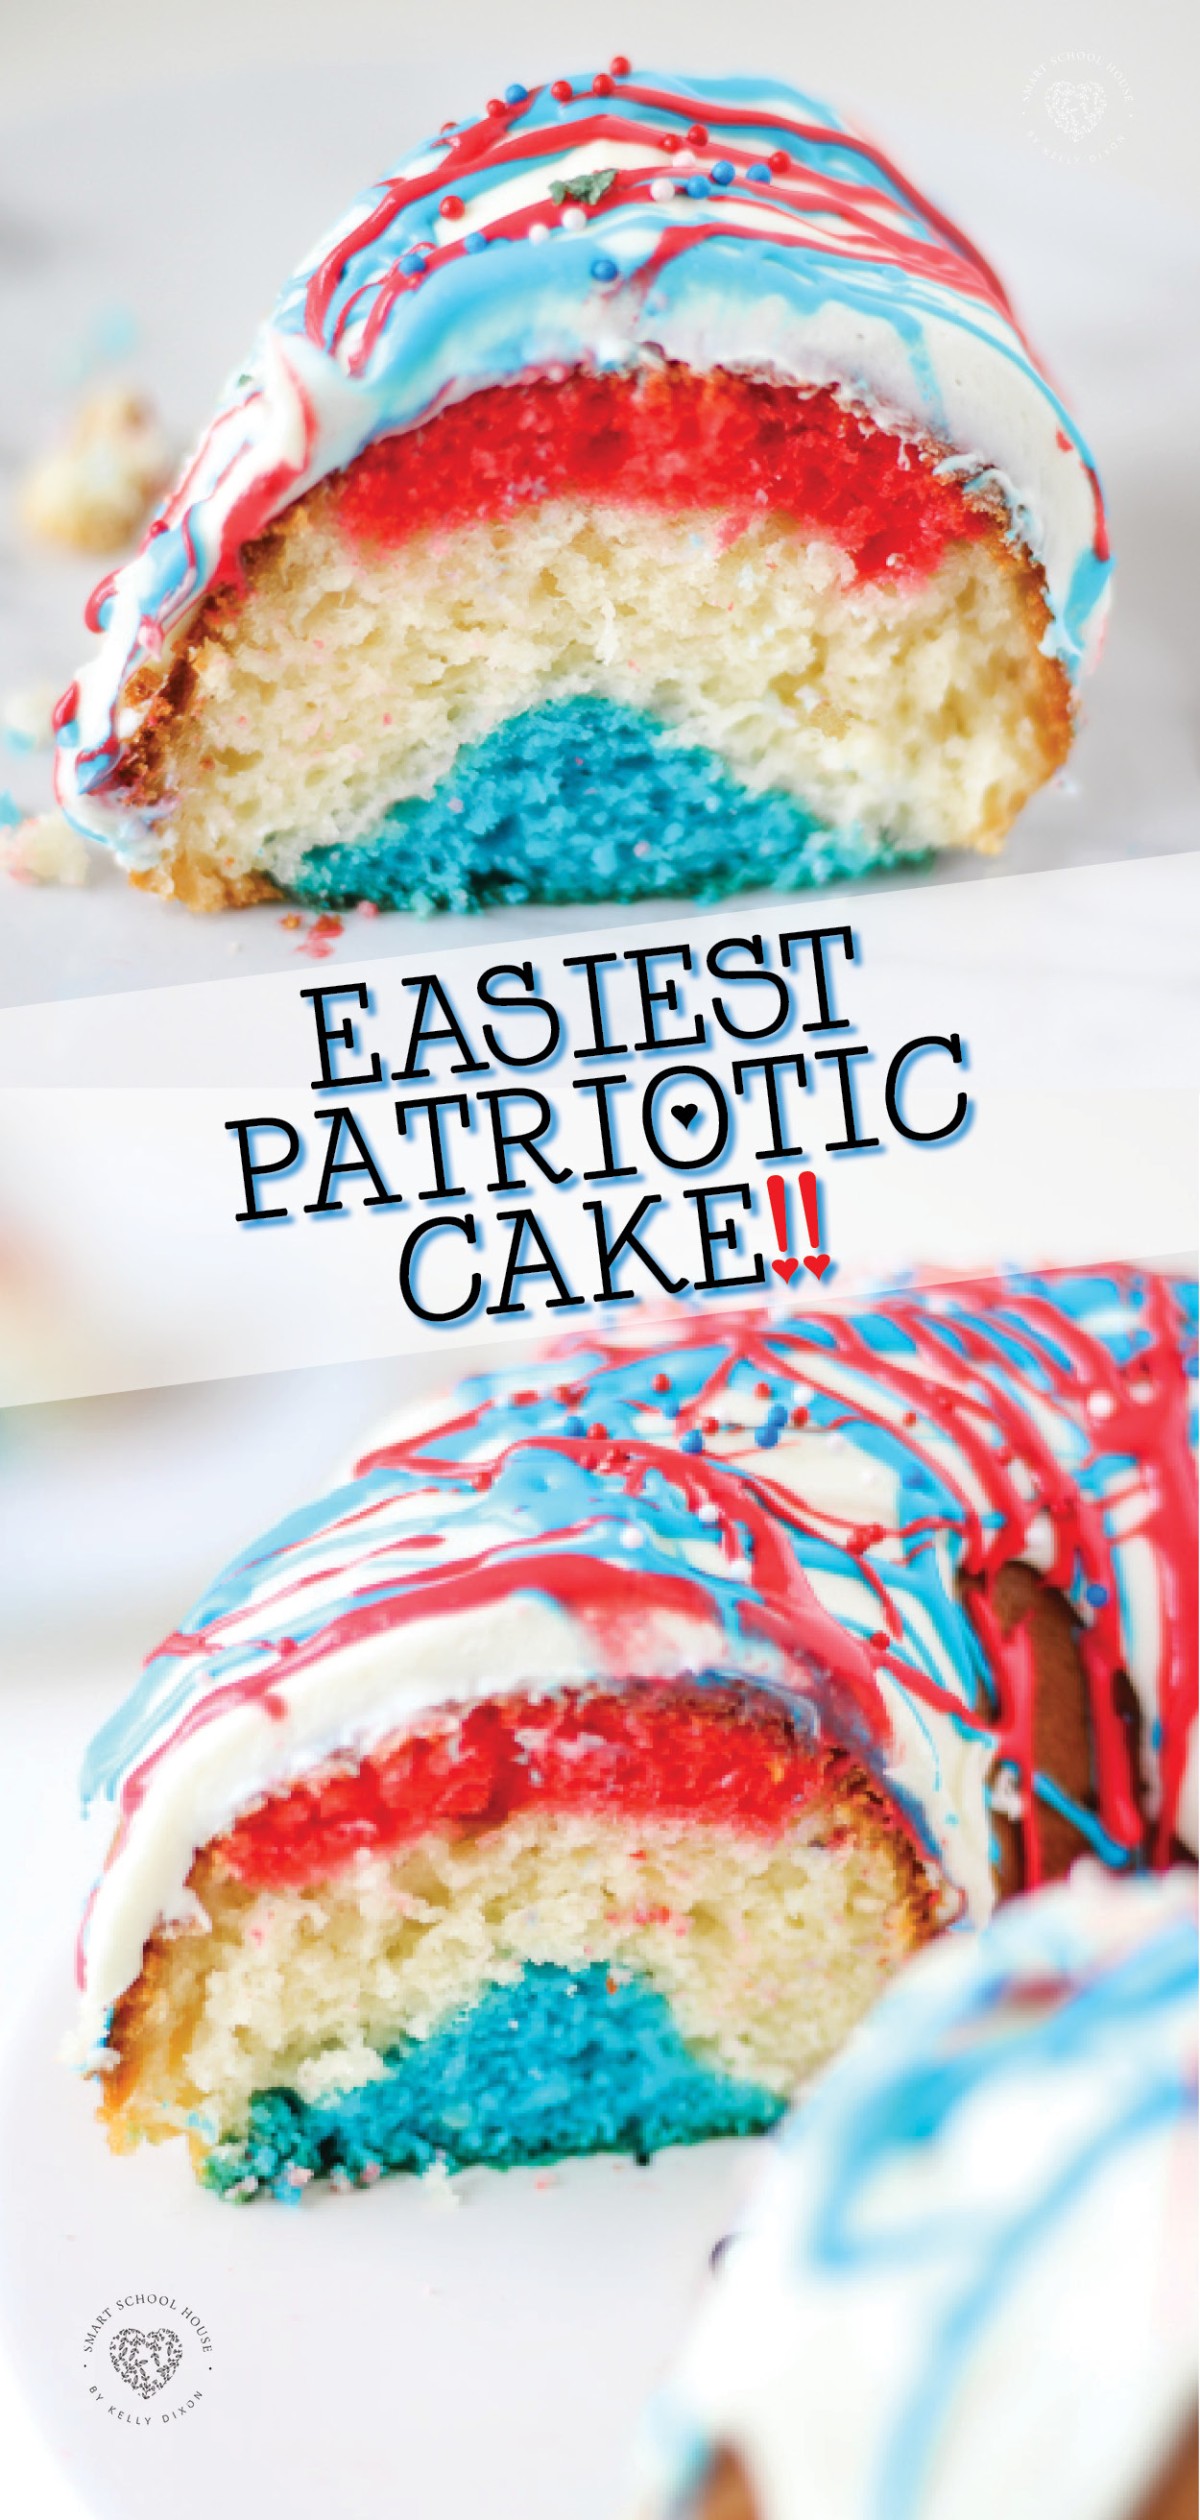 Blue Cake recipe is so pretty with three colorful layers of fluffy cake and patriotic drizzled frosting. It will be a hit for the Fourth of July, Memorial Day, and Flag Day!